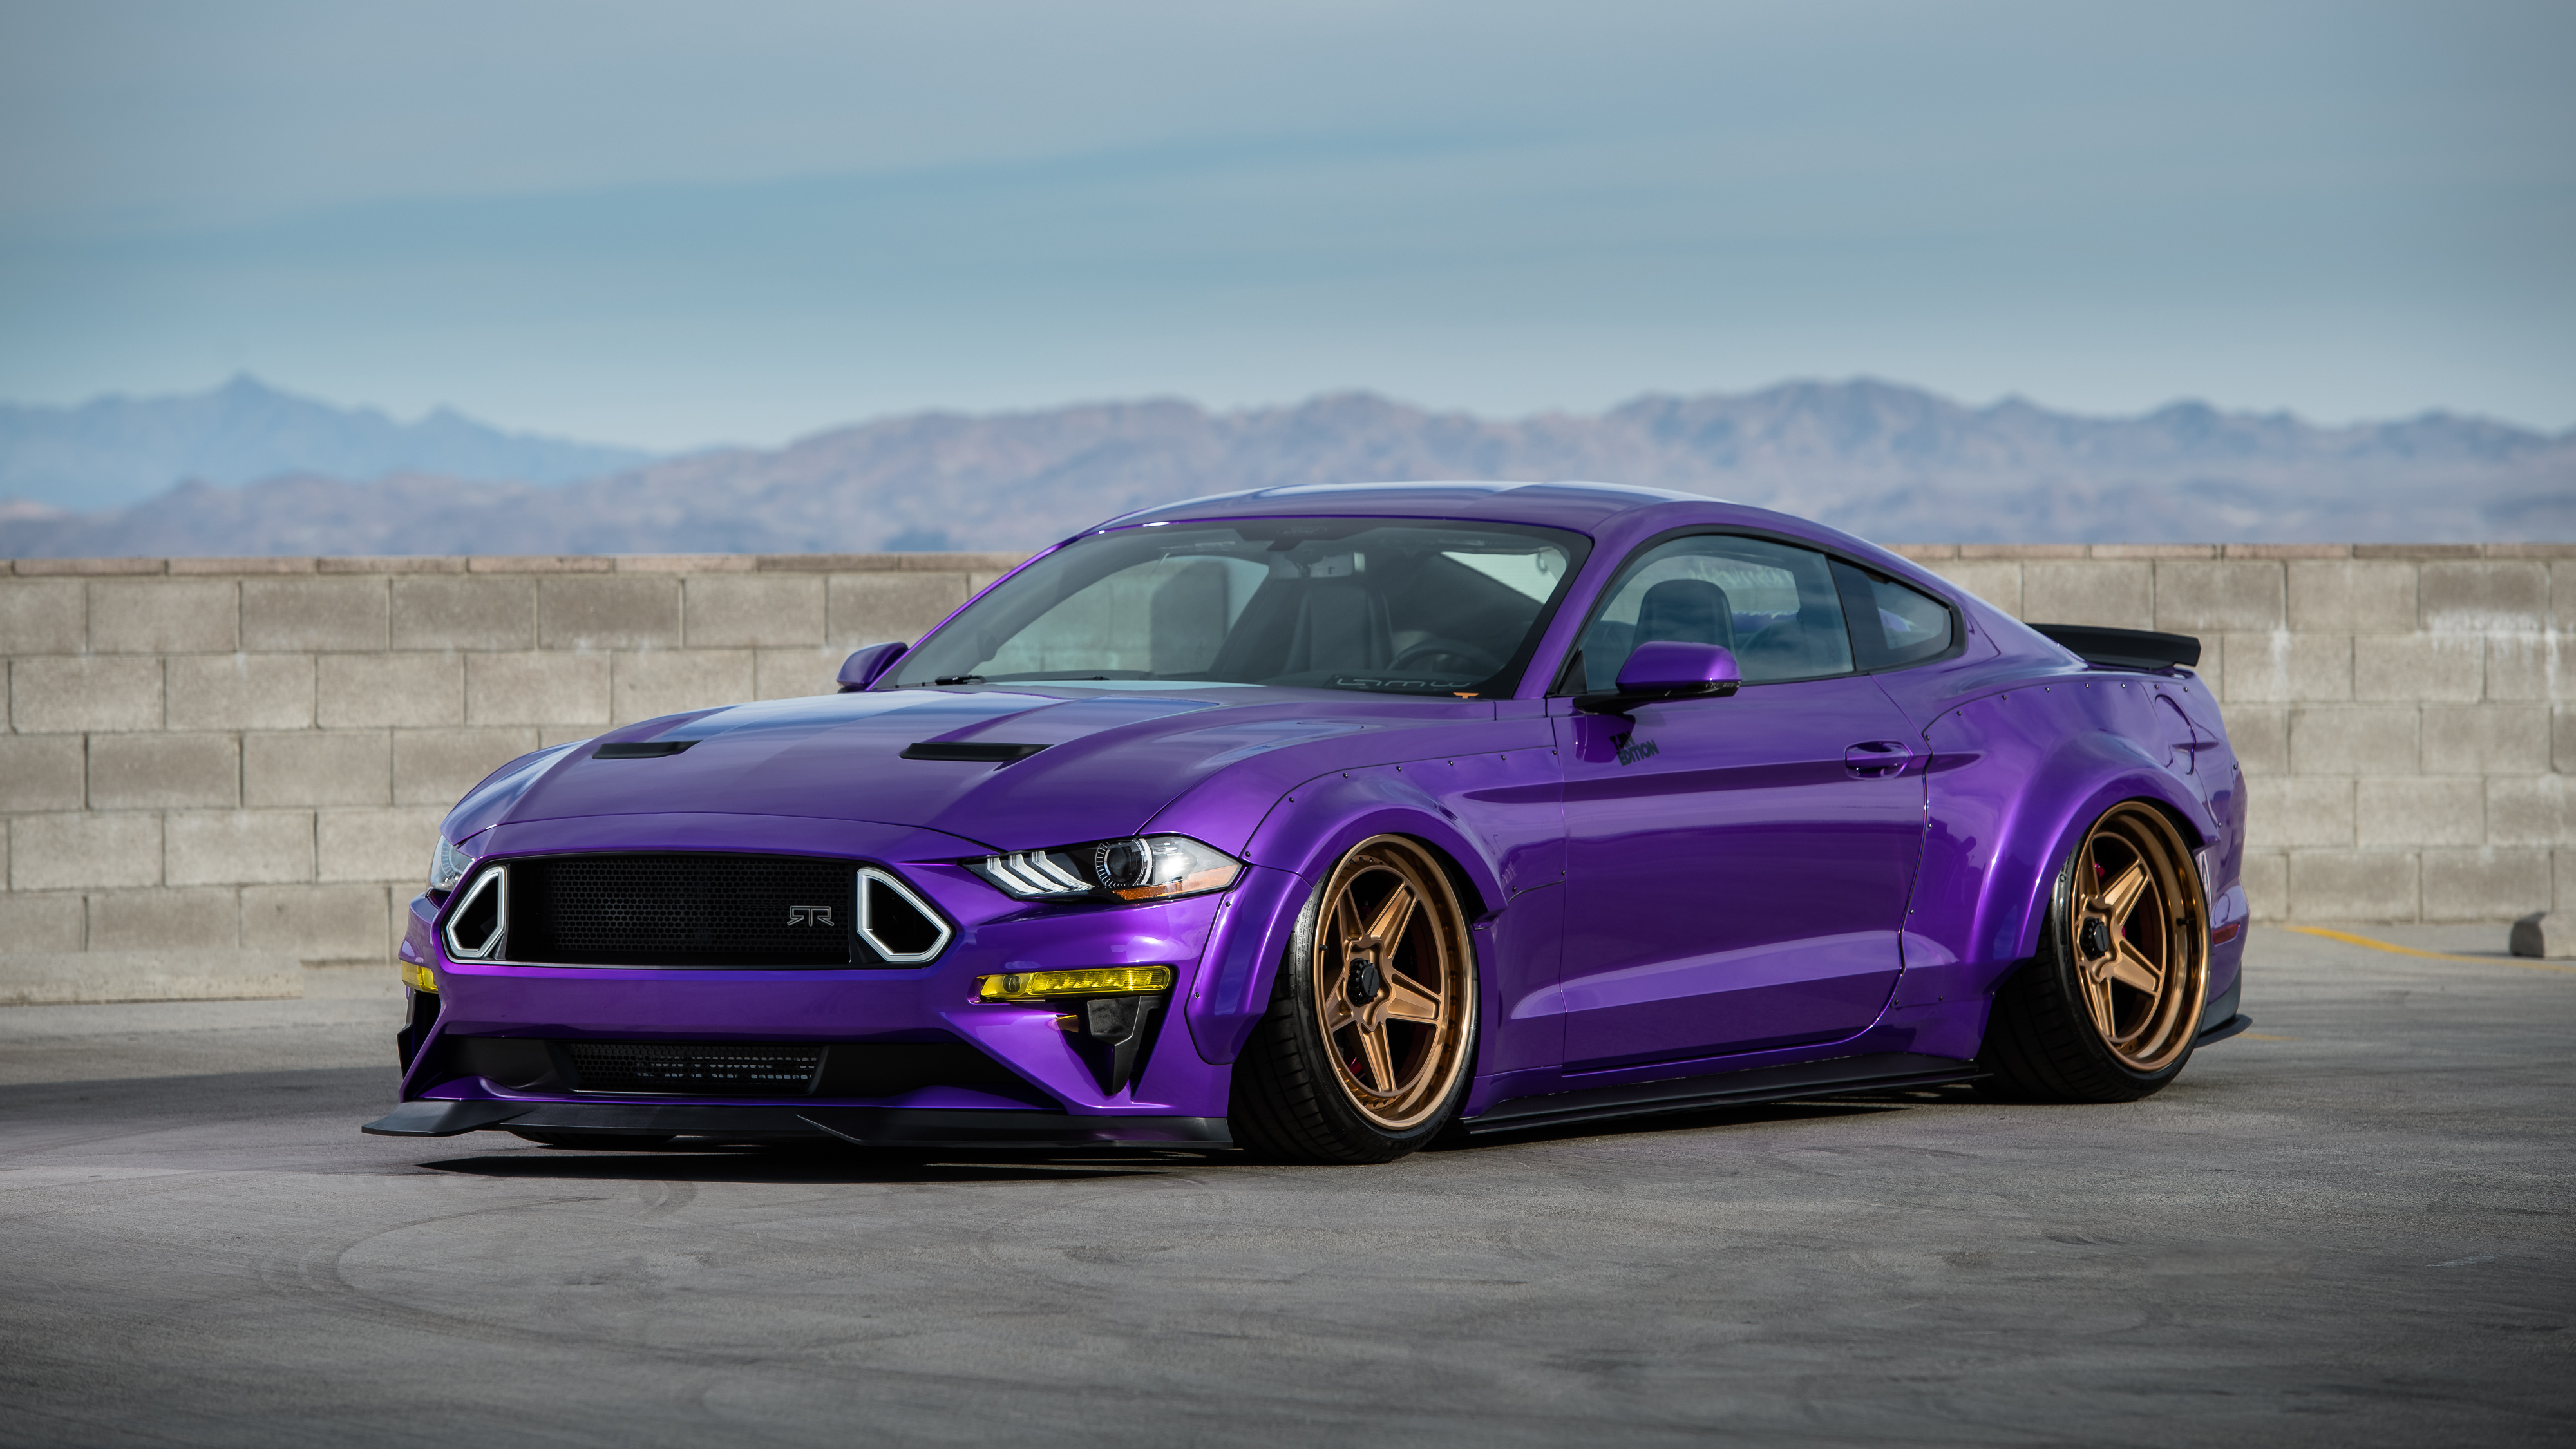 Ford Mustang RTR Car Tuning Vehicle Muscle Car Purple Cars Bolt On Fender Flares Colored Wheels 4000x2250